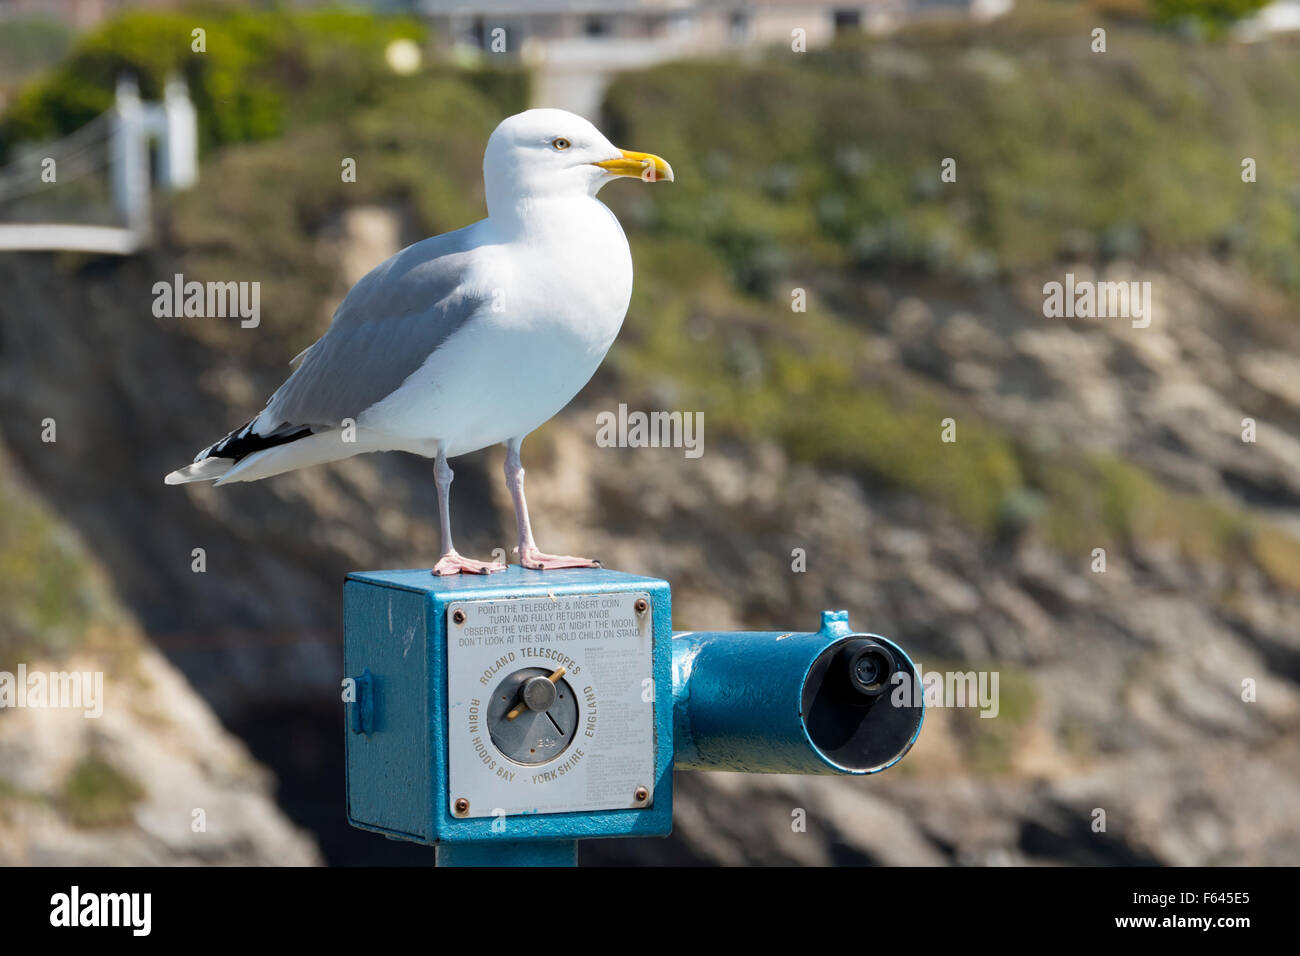 Seagull bird standing on a coin operated telescope in Newquay, Cornwall England. Stock Photo